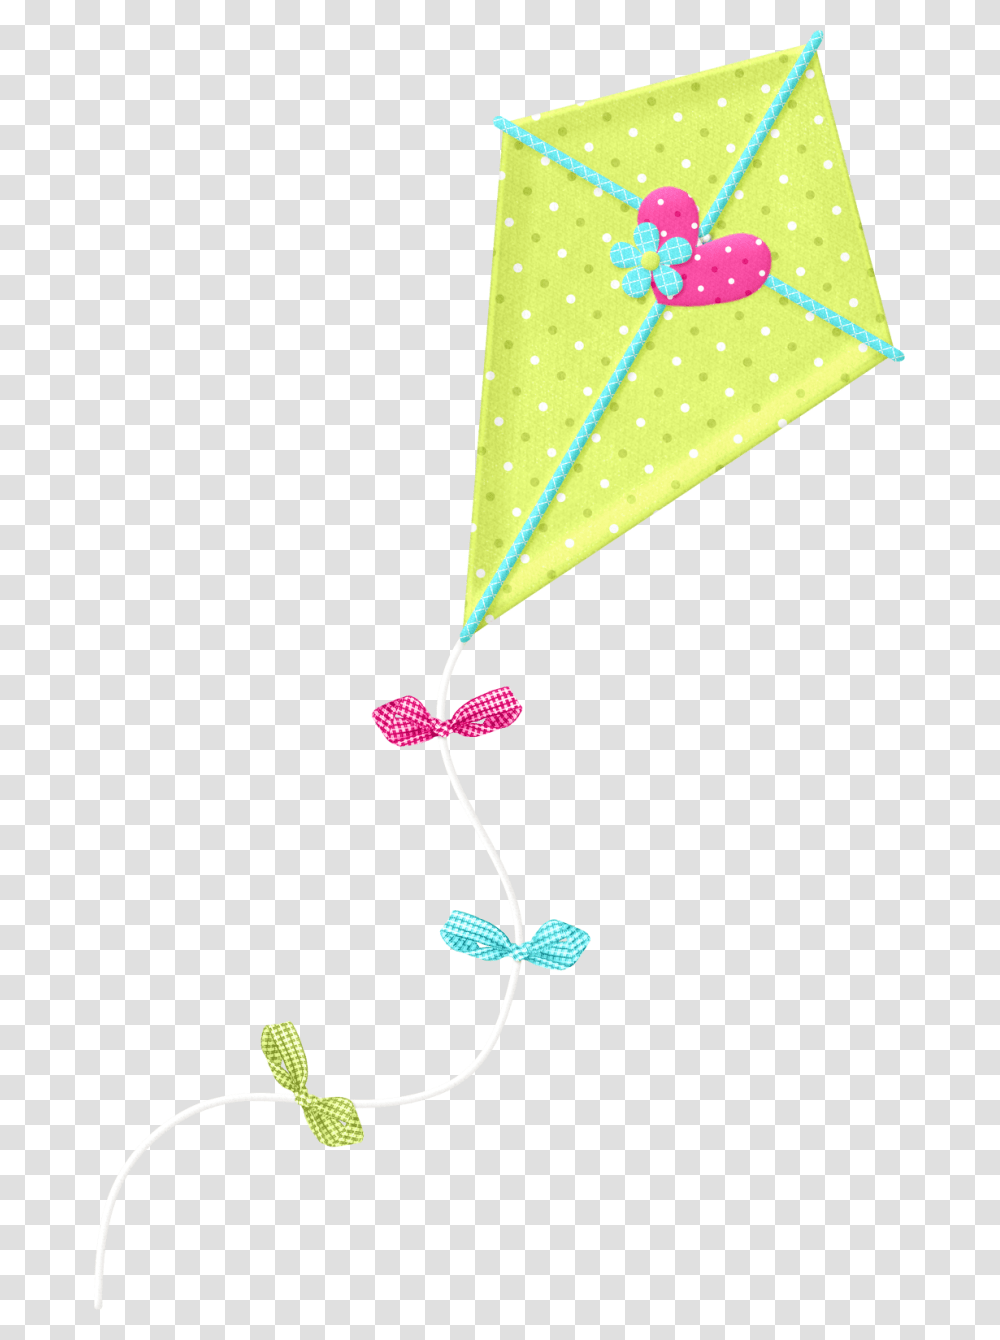 Pin By Saray Blacett Cometas De Papel Gif, Toy, Kite Transparent Png